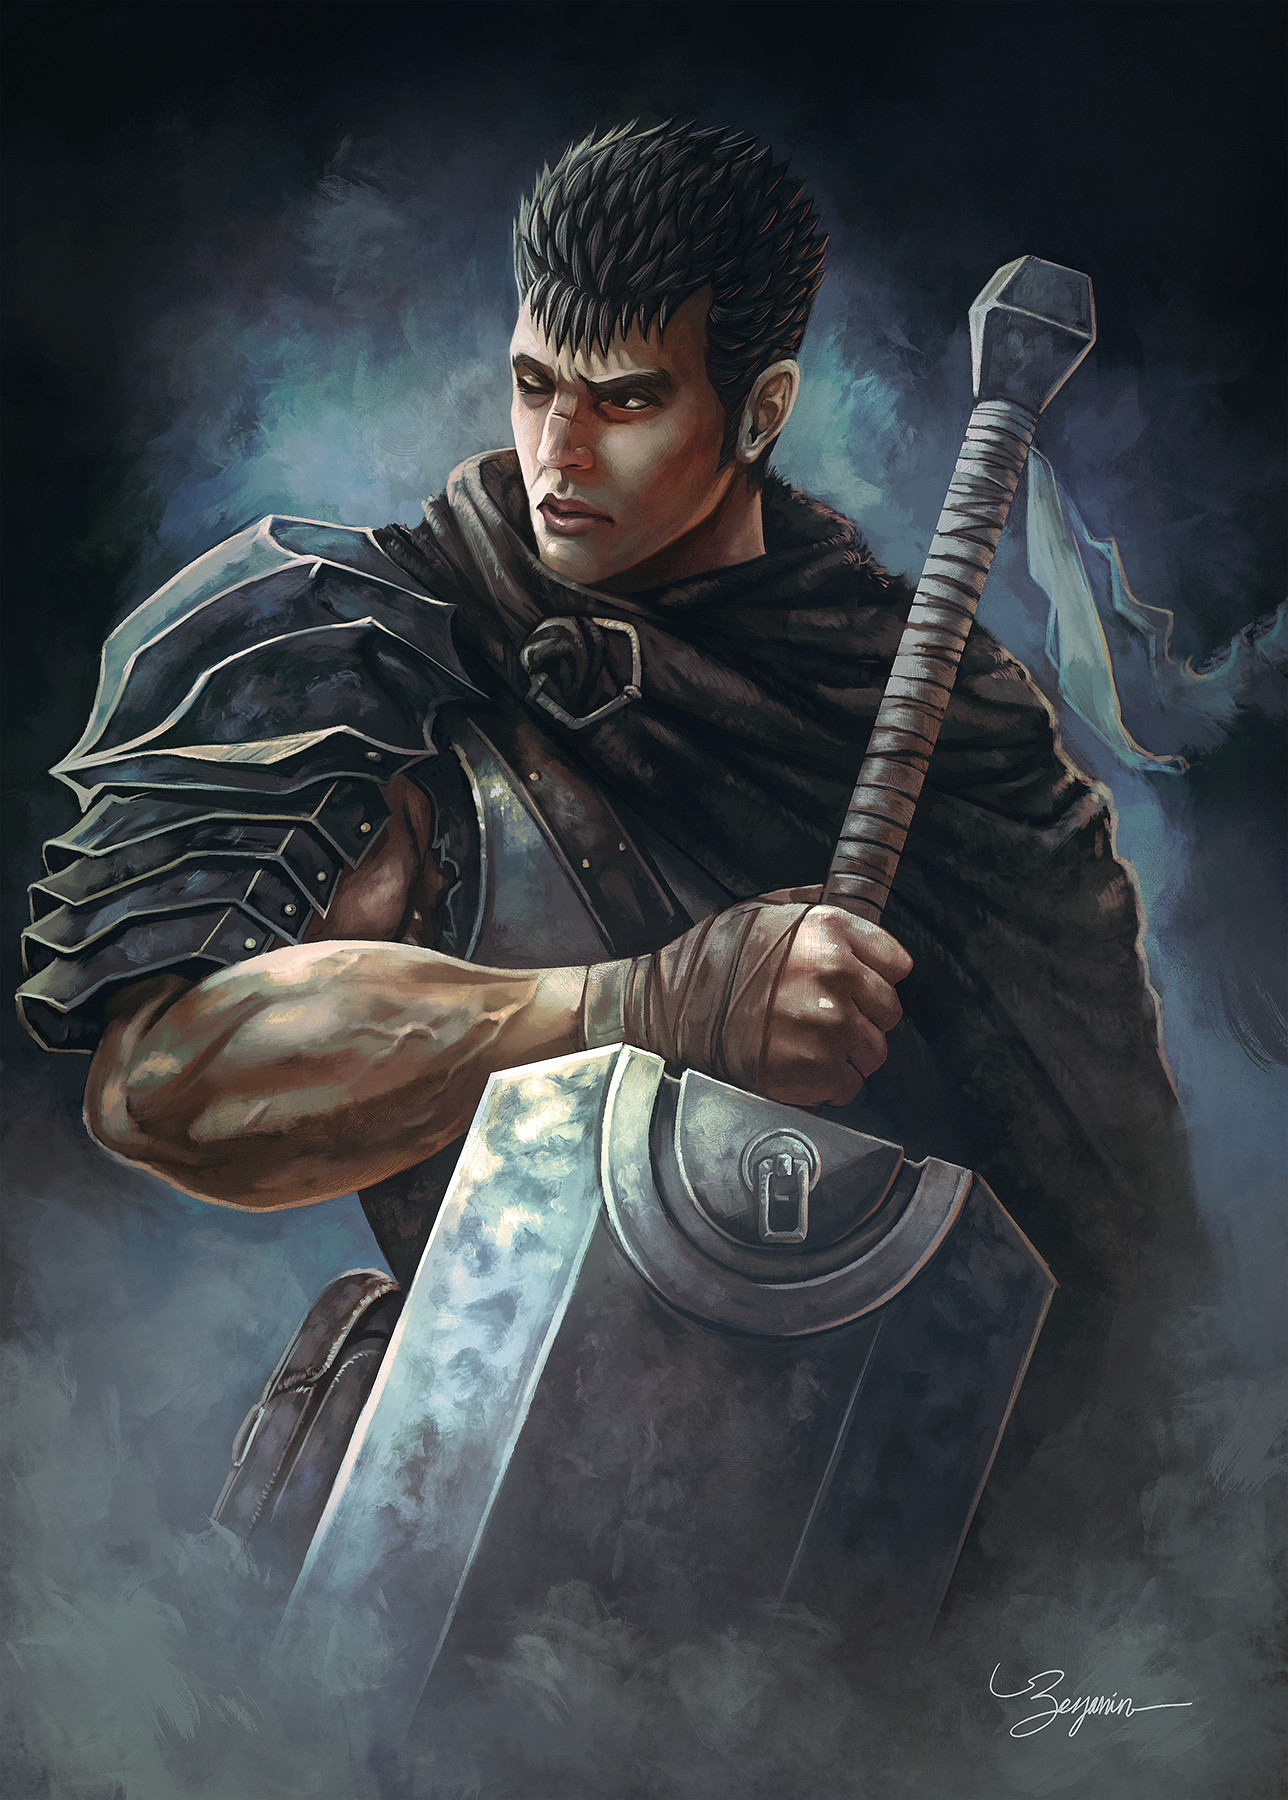 View, Download, Rate, and Comment on this Anime Berserk Art by Benjamin Gou...